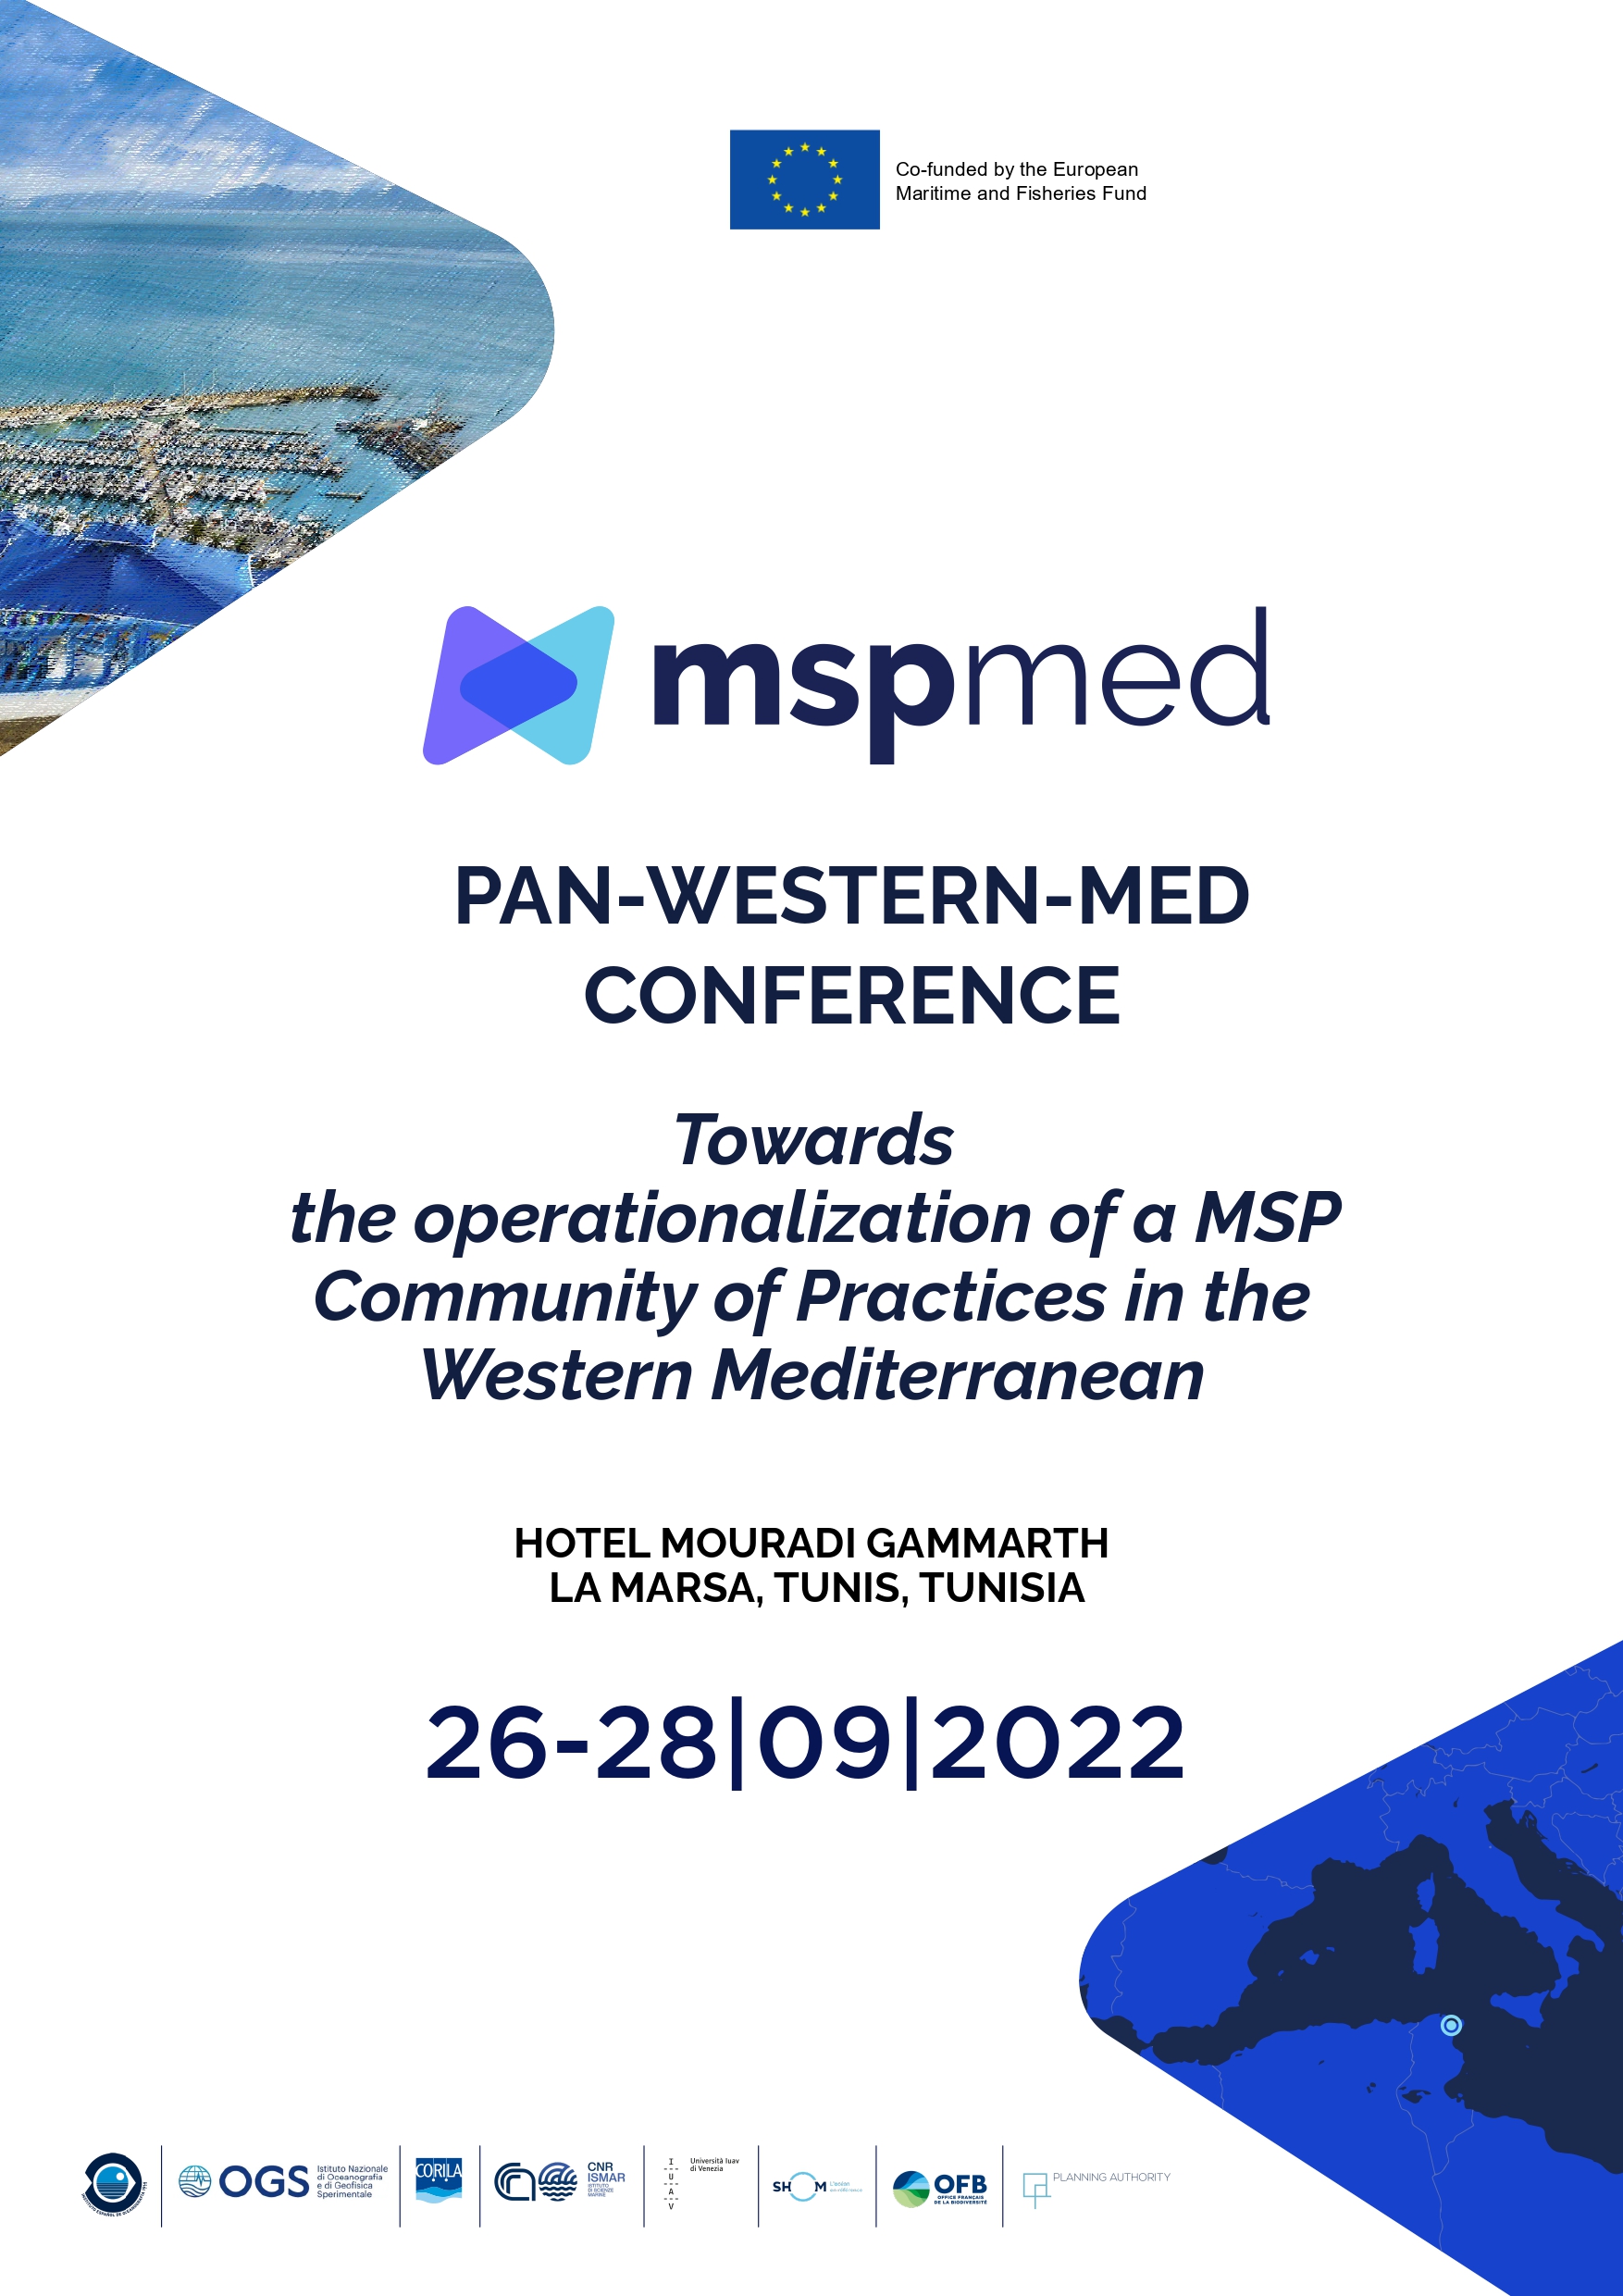 Towards the operationalization of a MSP Community of Practices in the Western Mediterranean